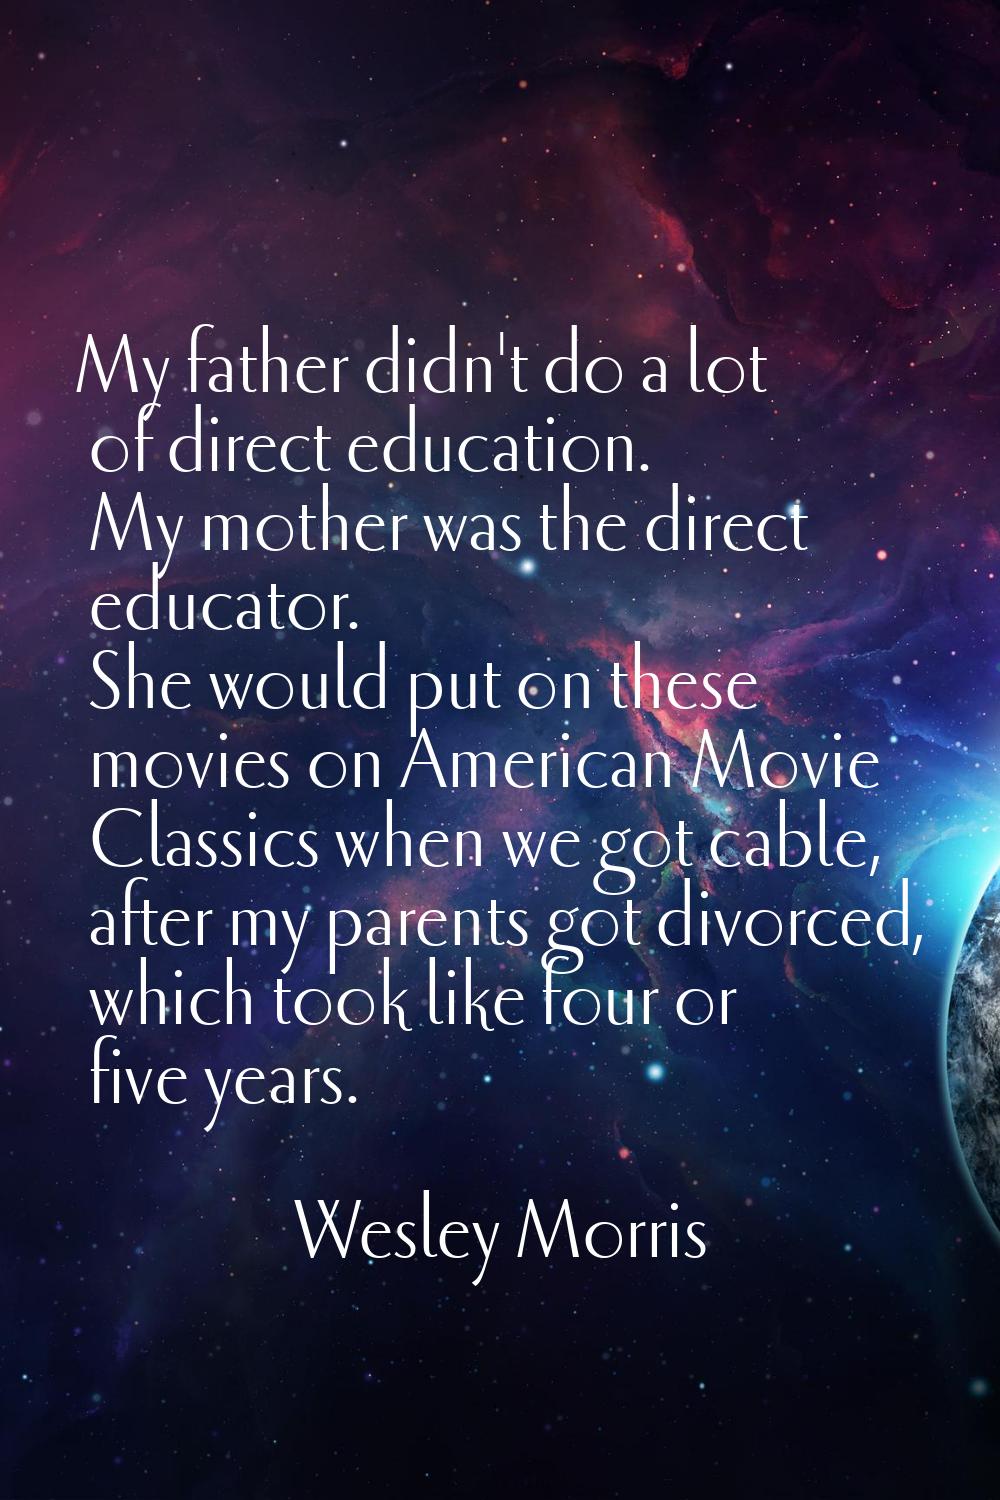 My father didn't do a lot of direct education. My mother was the direct educator. She would put on 